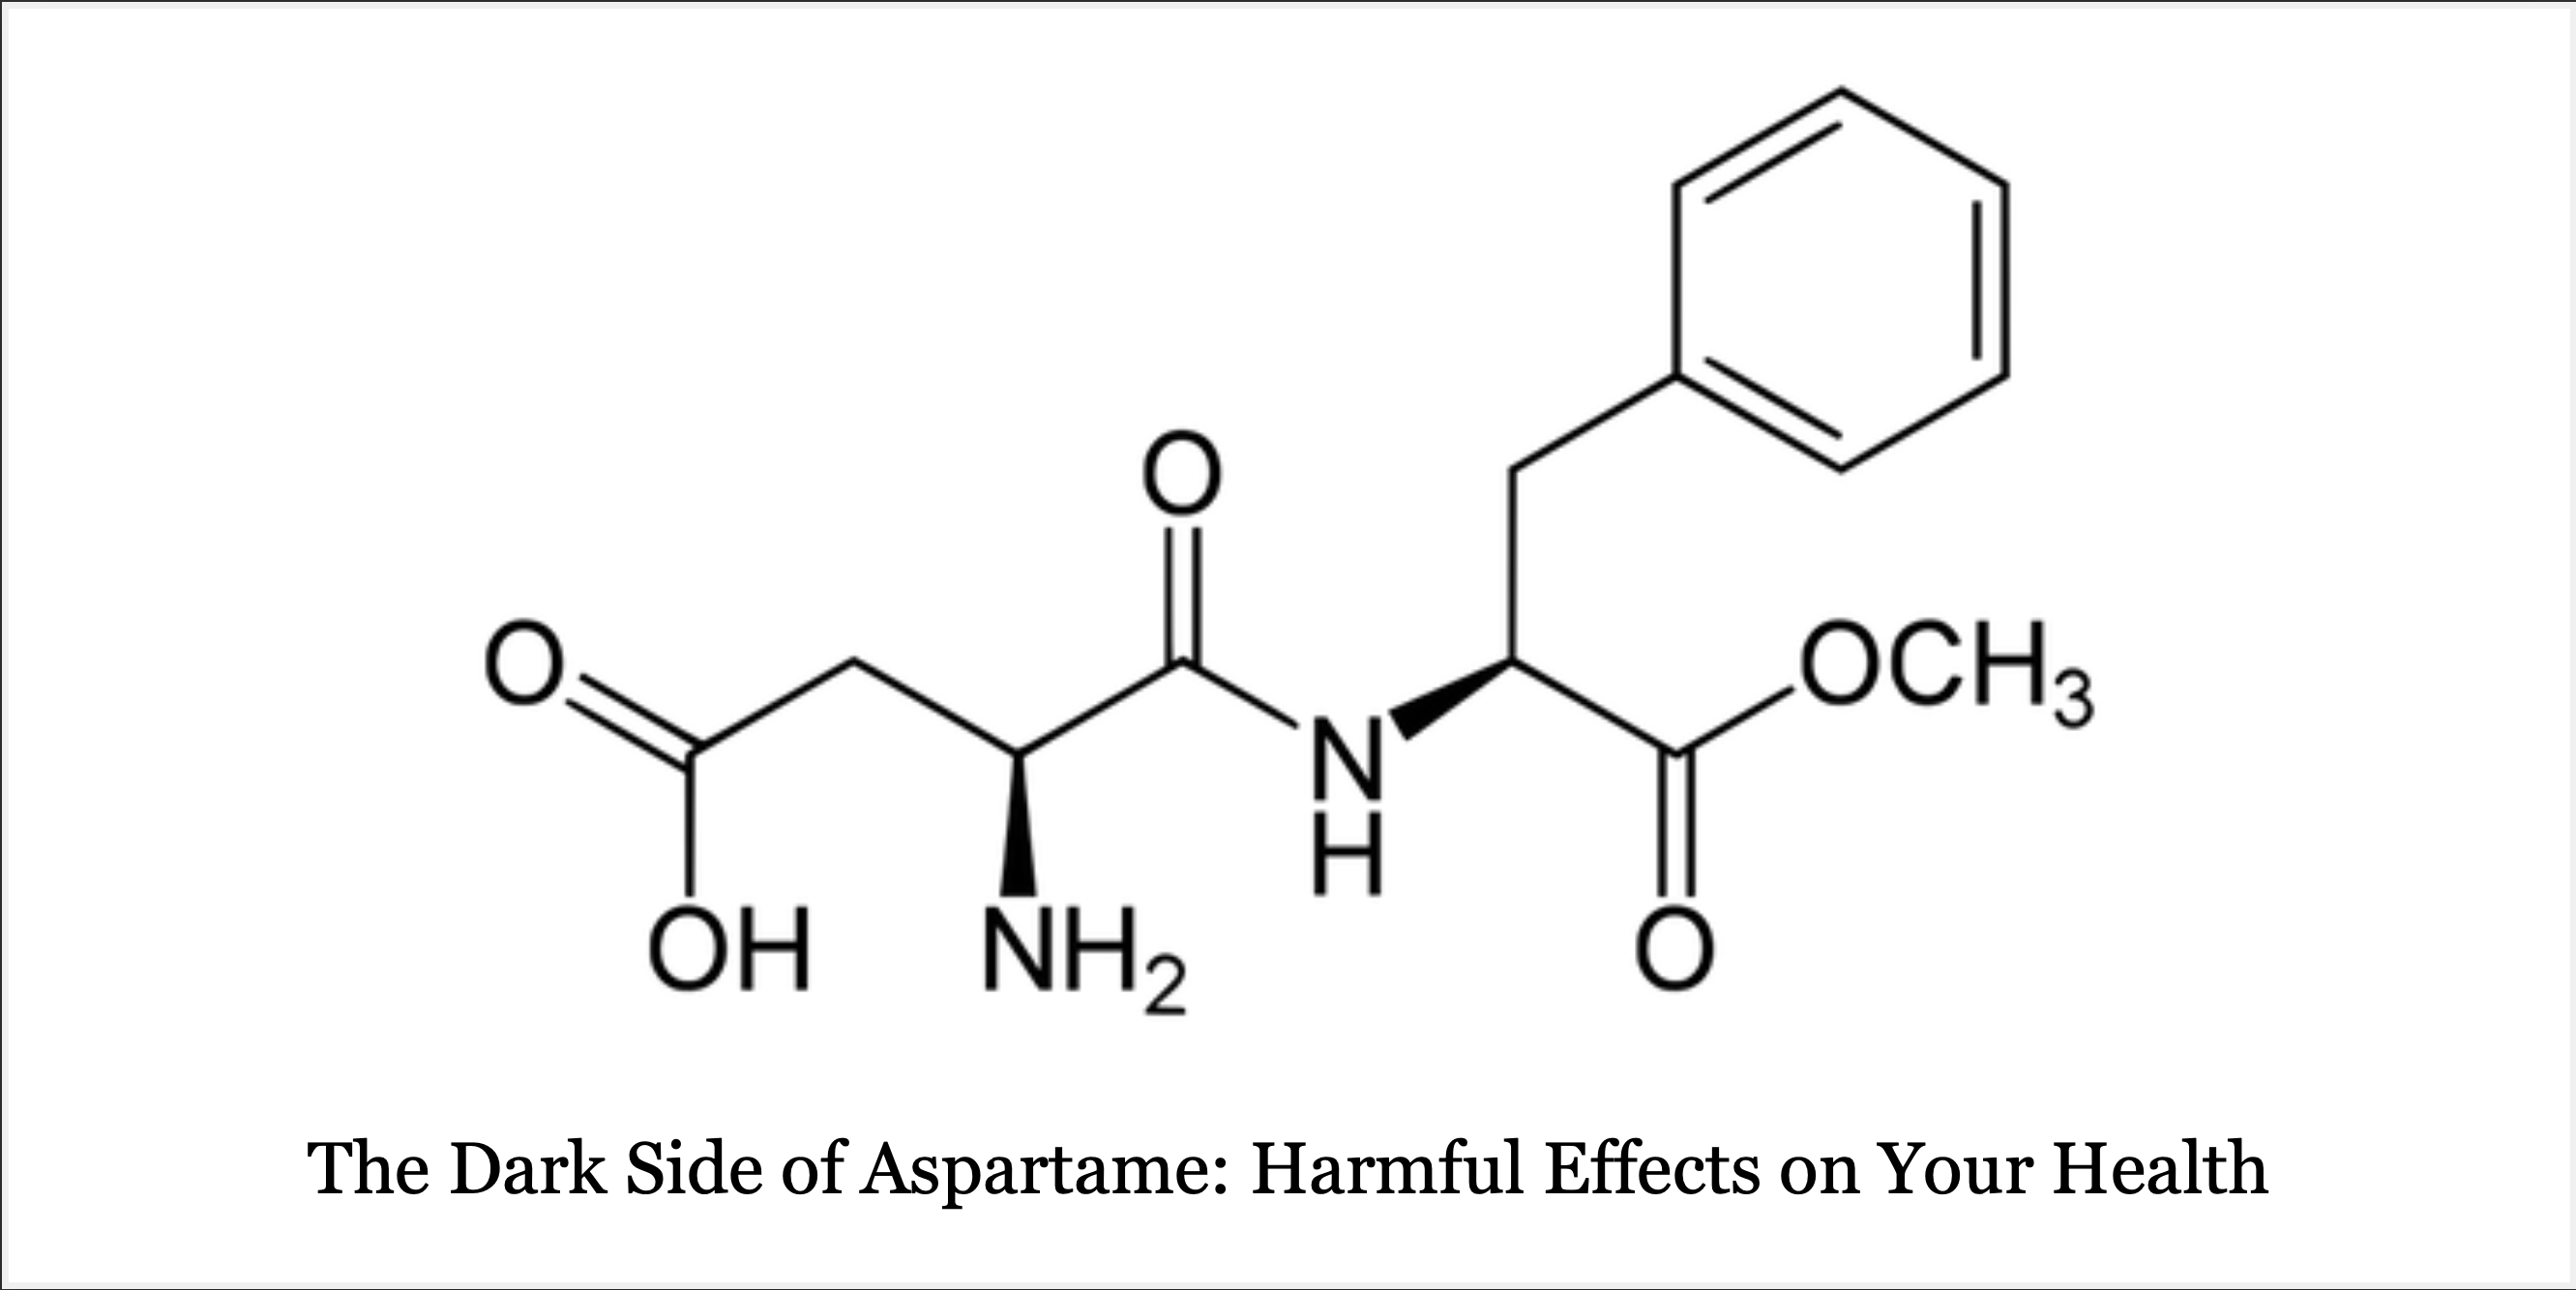 The Dark Side of Aspartame: Harmful Effects on Your Health